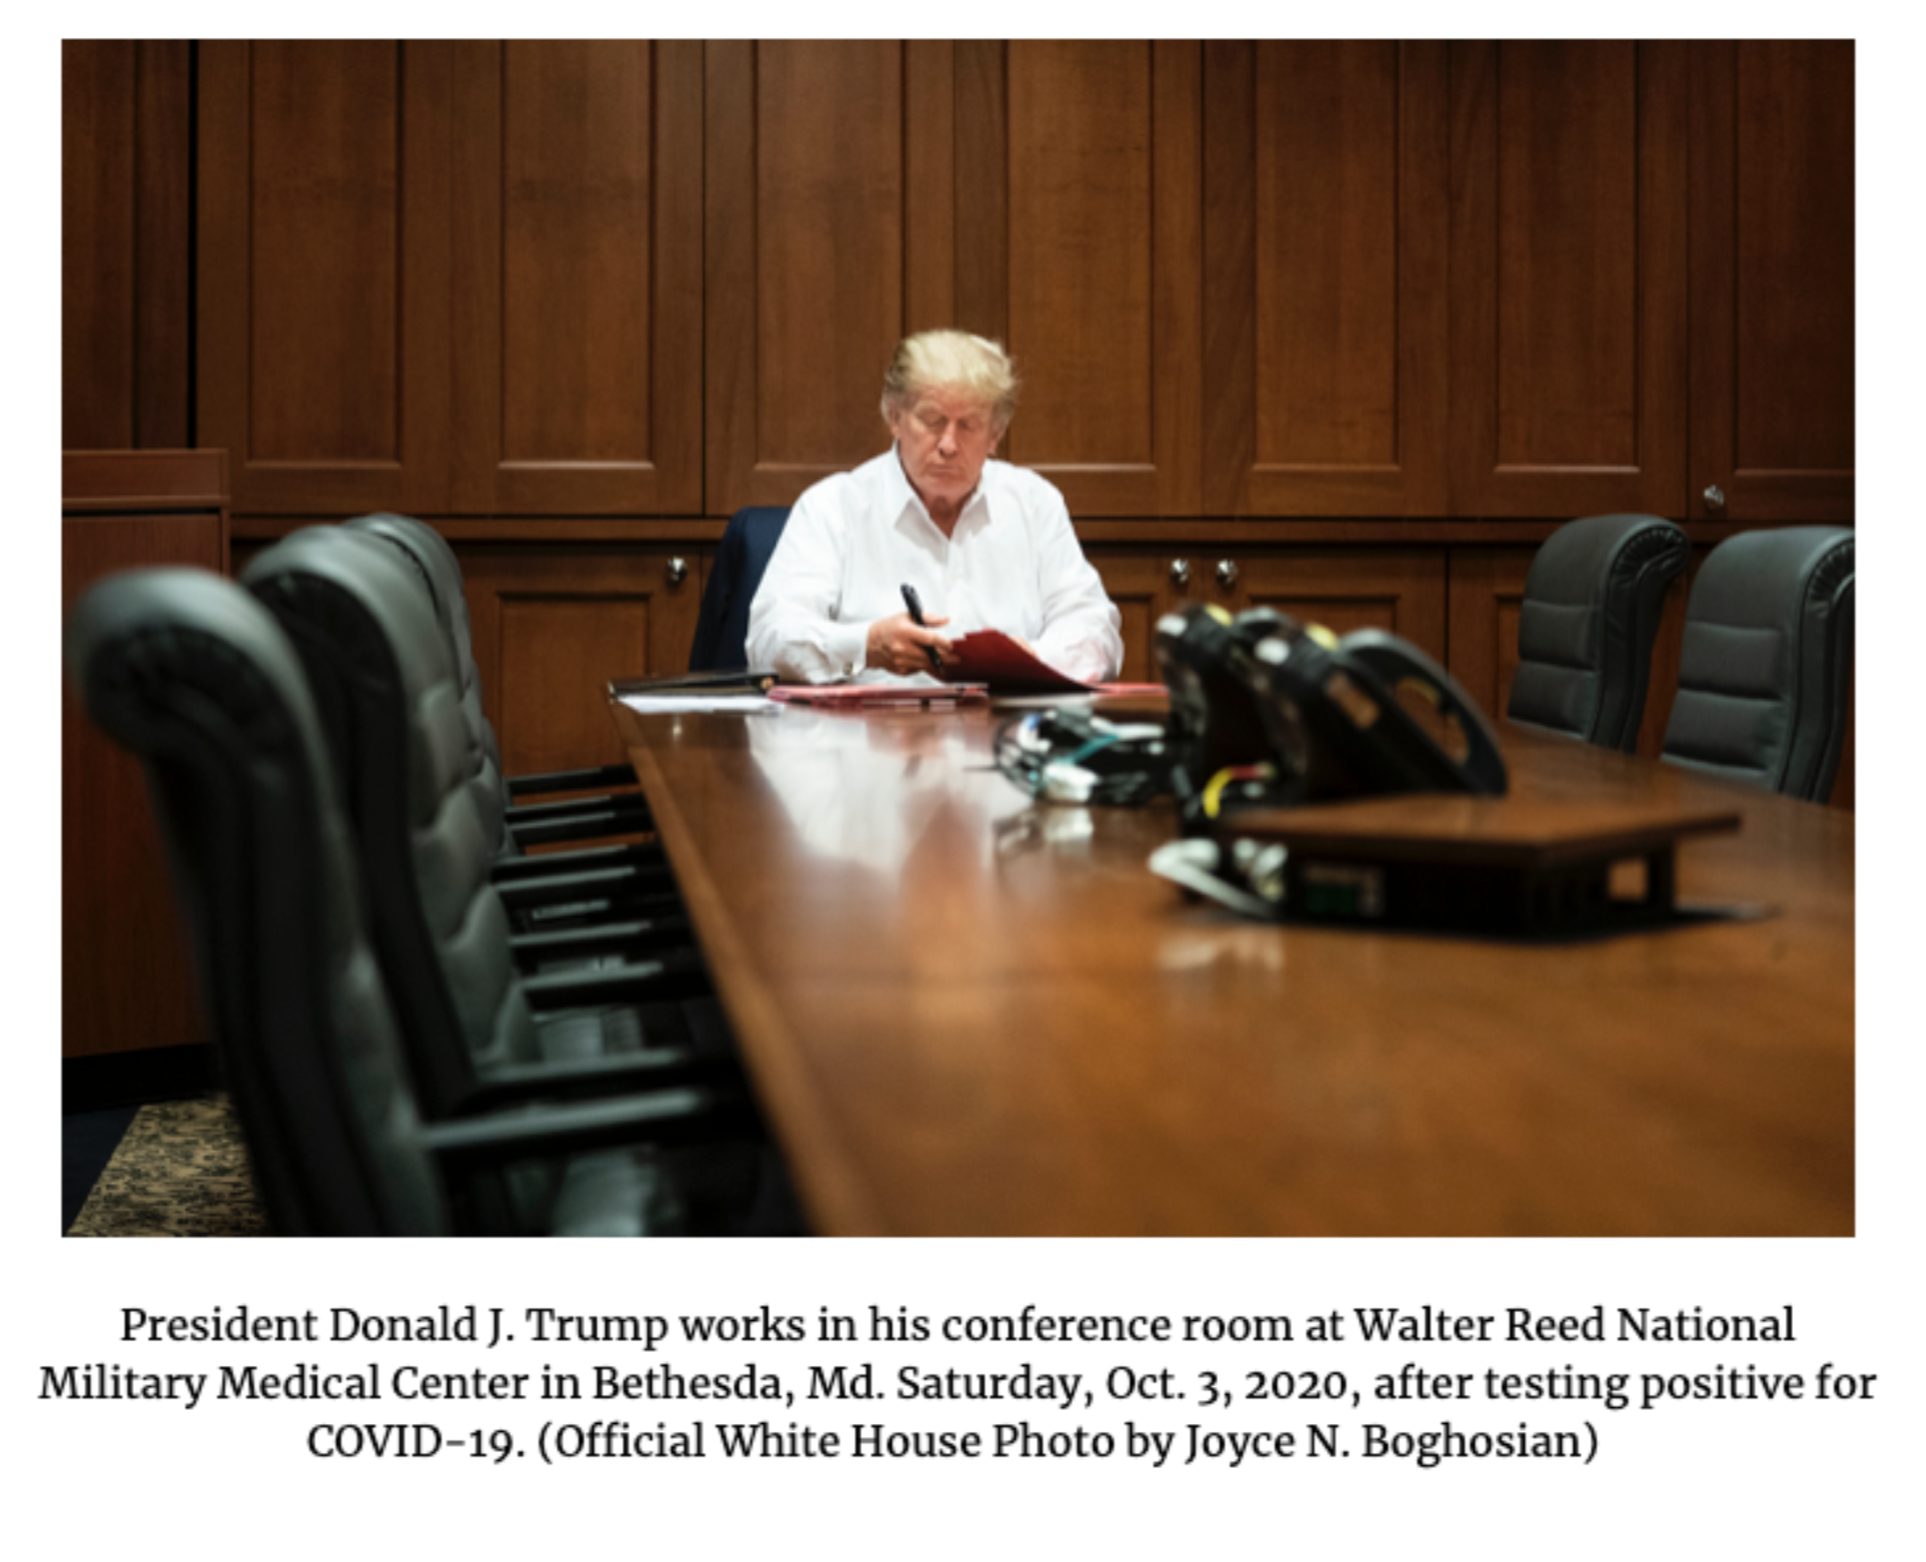 photo caption - President Donald J. Trump works in his conference room at Walter Reed National Military Medical Center in Bethesda, Md. Saturday, Oct. 3, 2020, after testing positive for Covid19. Official White House Photo by Joyce N. Boghosian